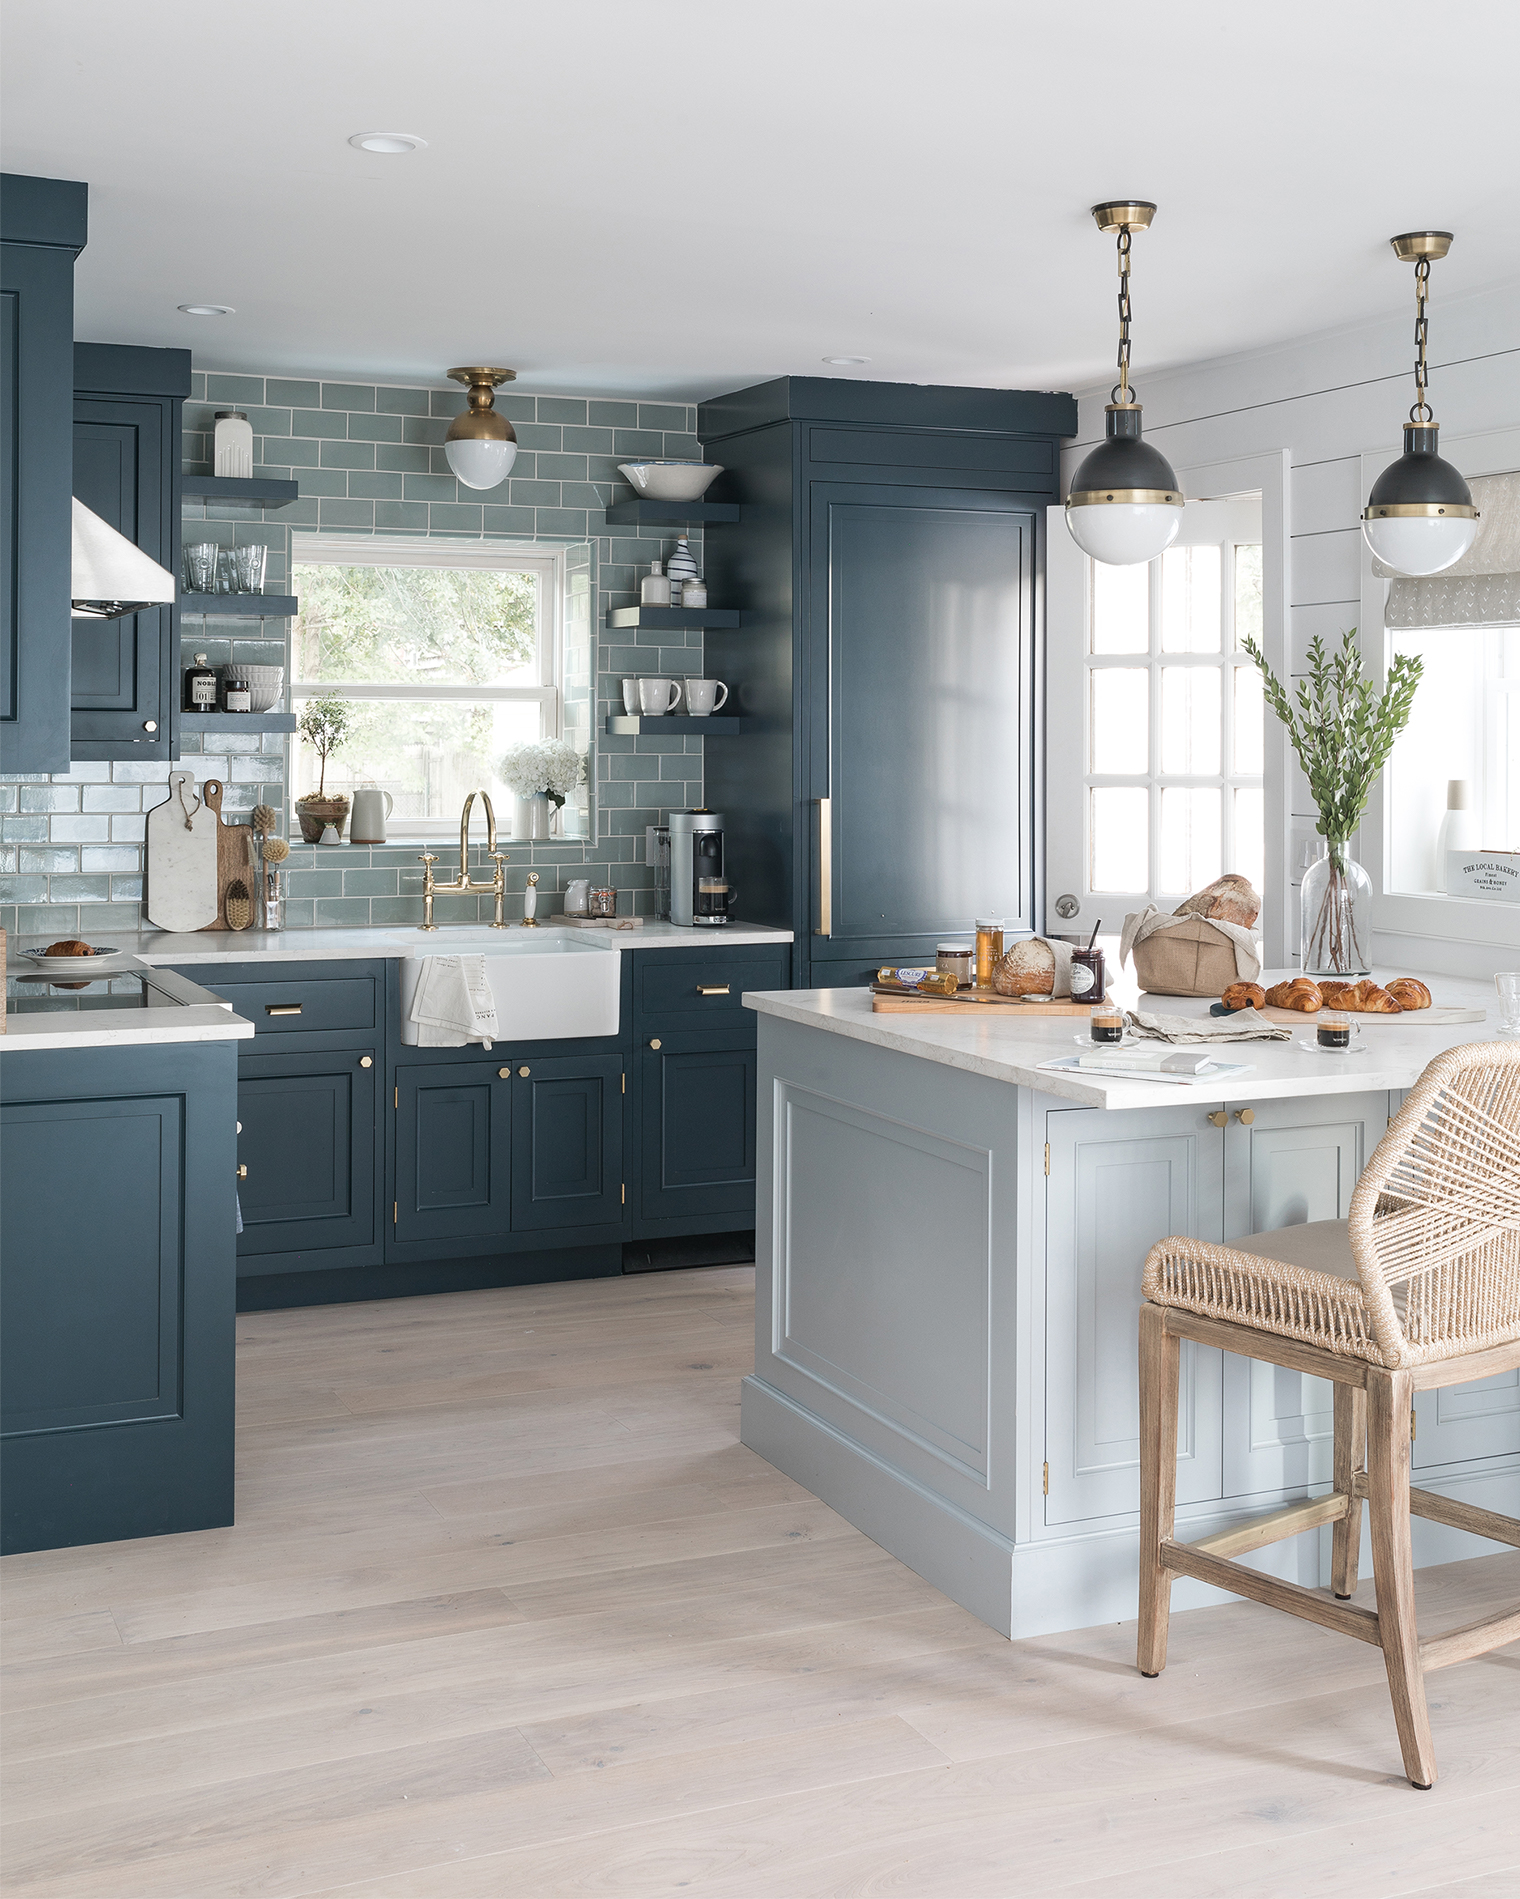 Turquoise Kitchens at their Refreshing Best: Welcome Home Breezy